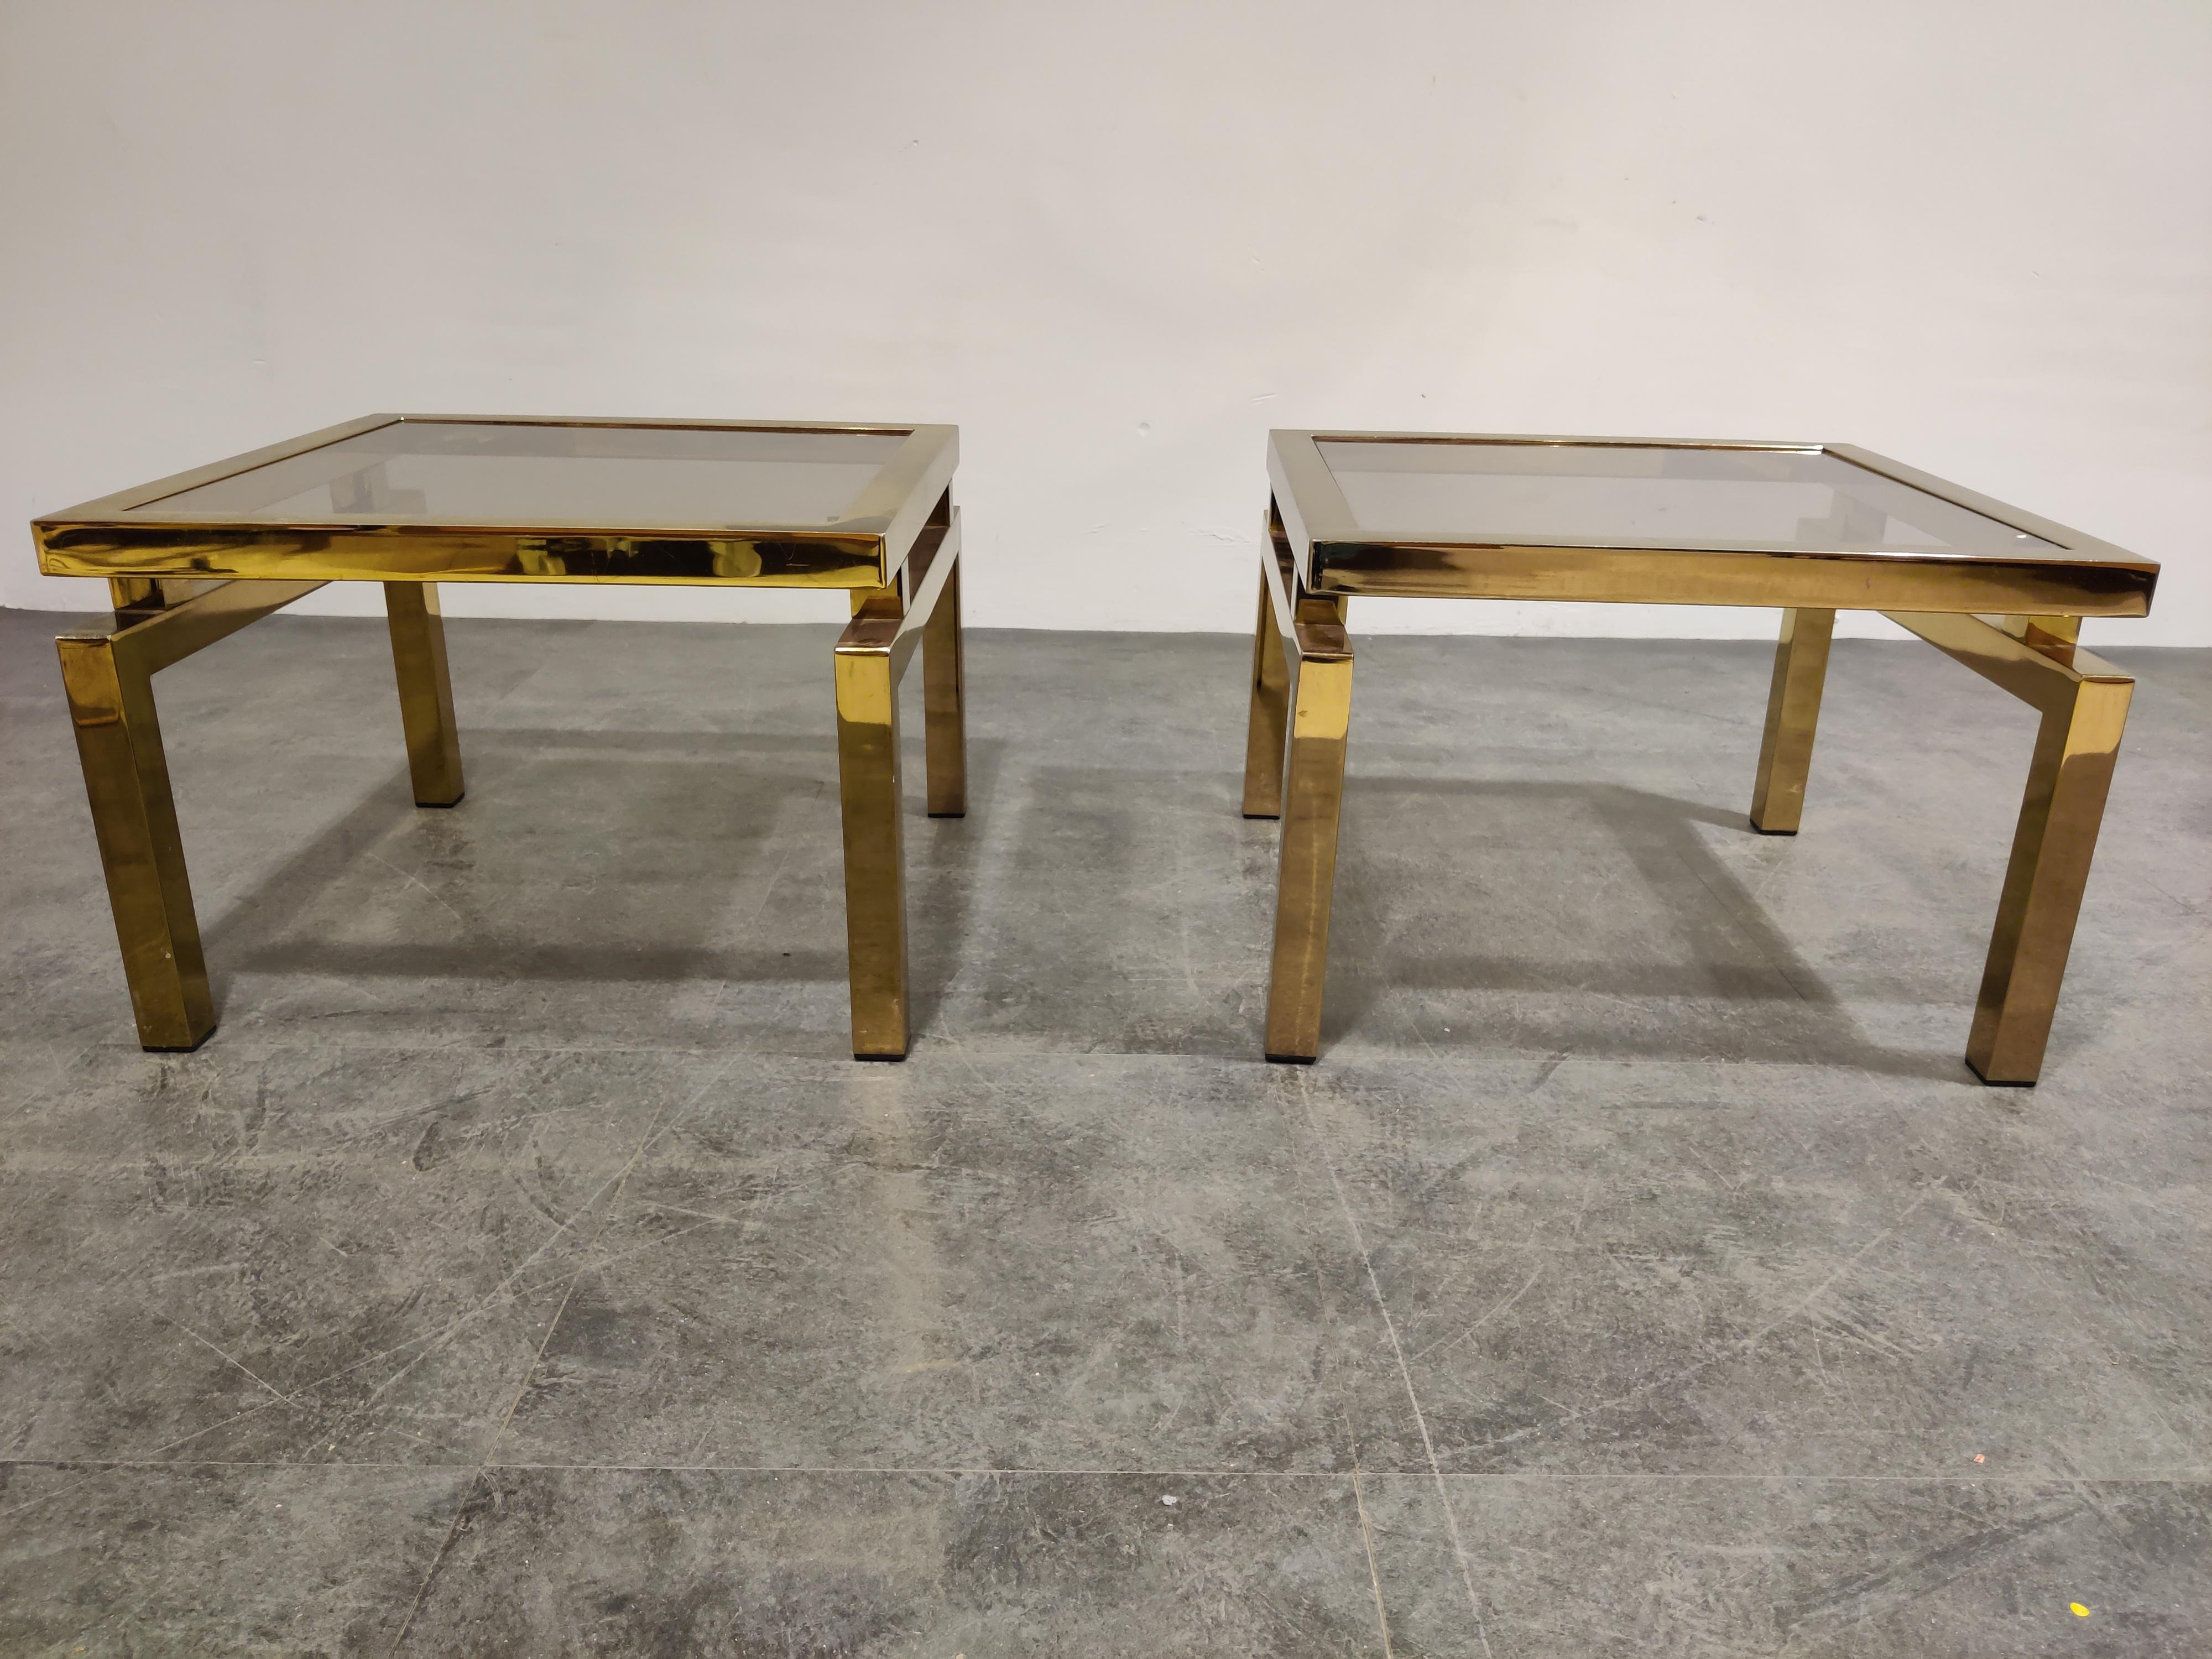 Gorgeous pair of brass coffee tables with floating top and smoked glass.

Very much in the style of Guy Lefevre.

Ideal as side tables or bedside tables.

Condition: brass is in good condition apart from one faded spot on the corner on one of